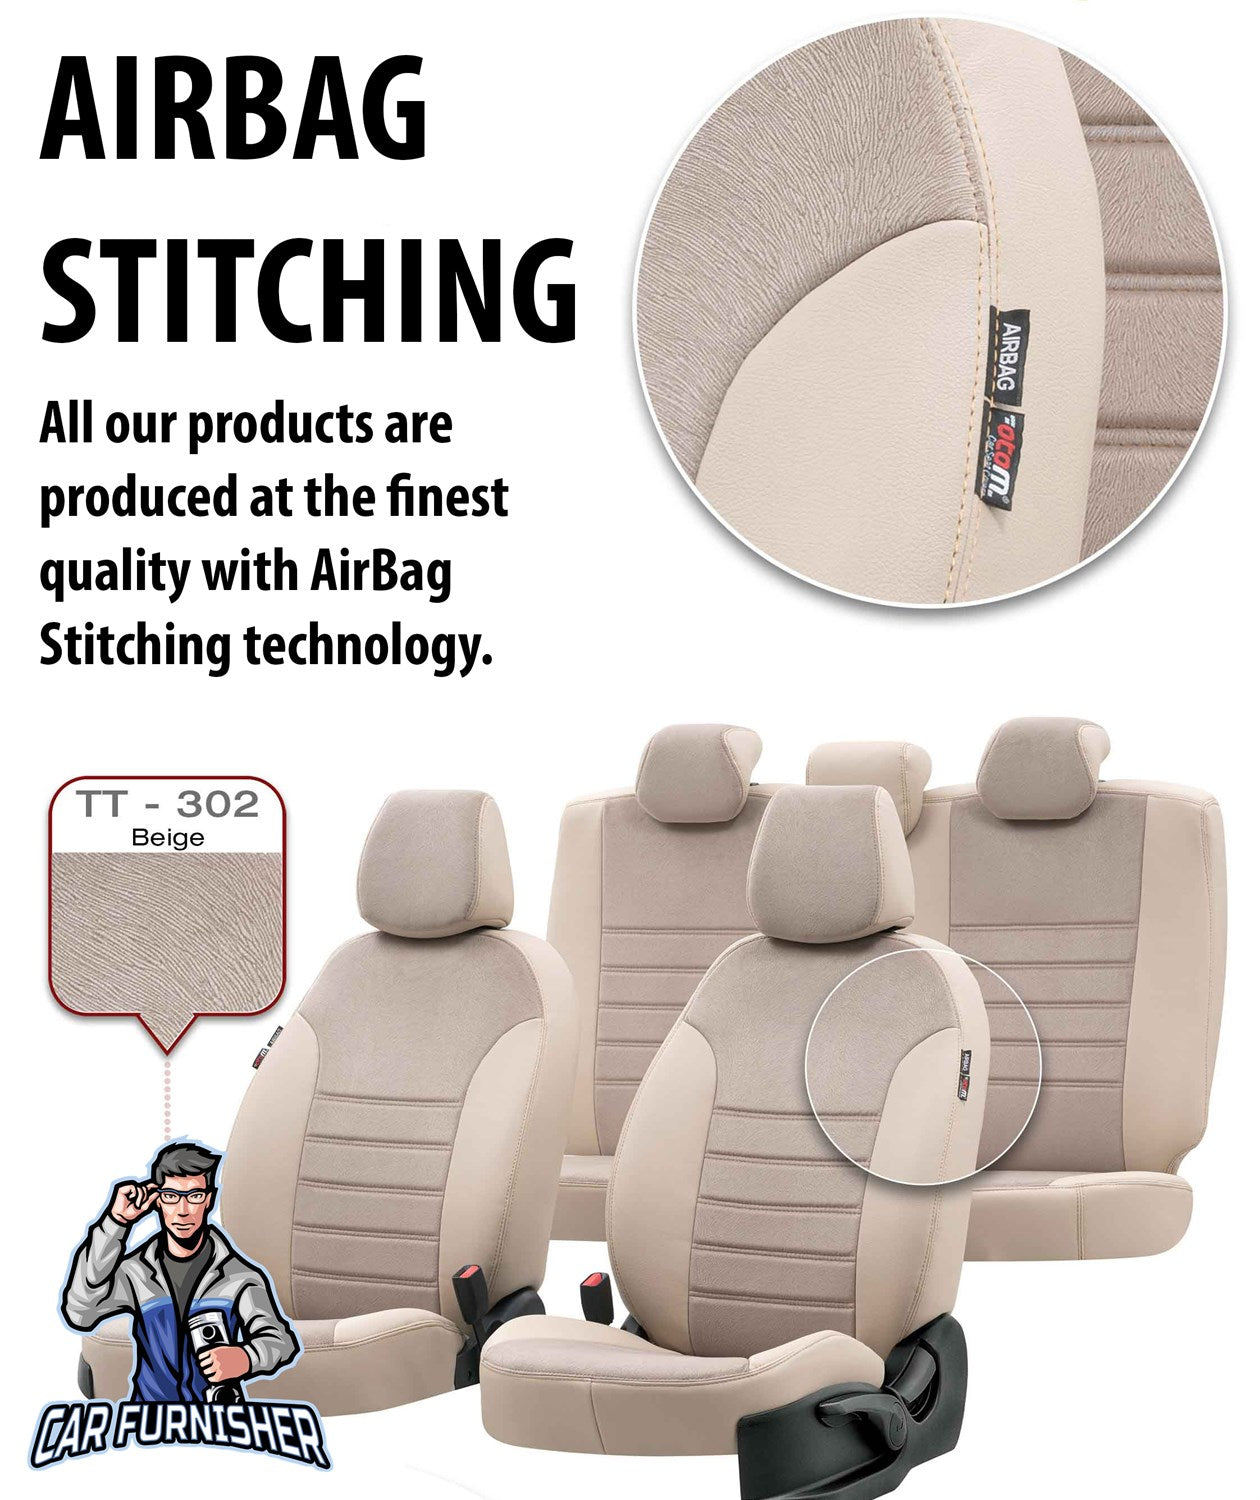 Renault Master Seat Covers London Foal Feather Design Ivory Leather & Foal Feather